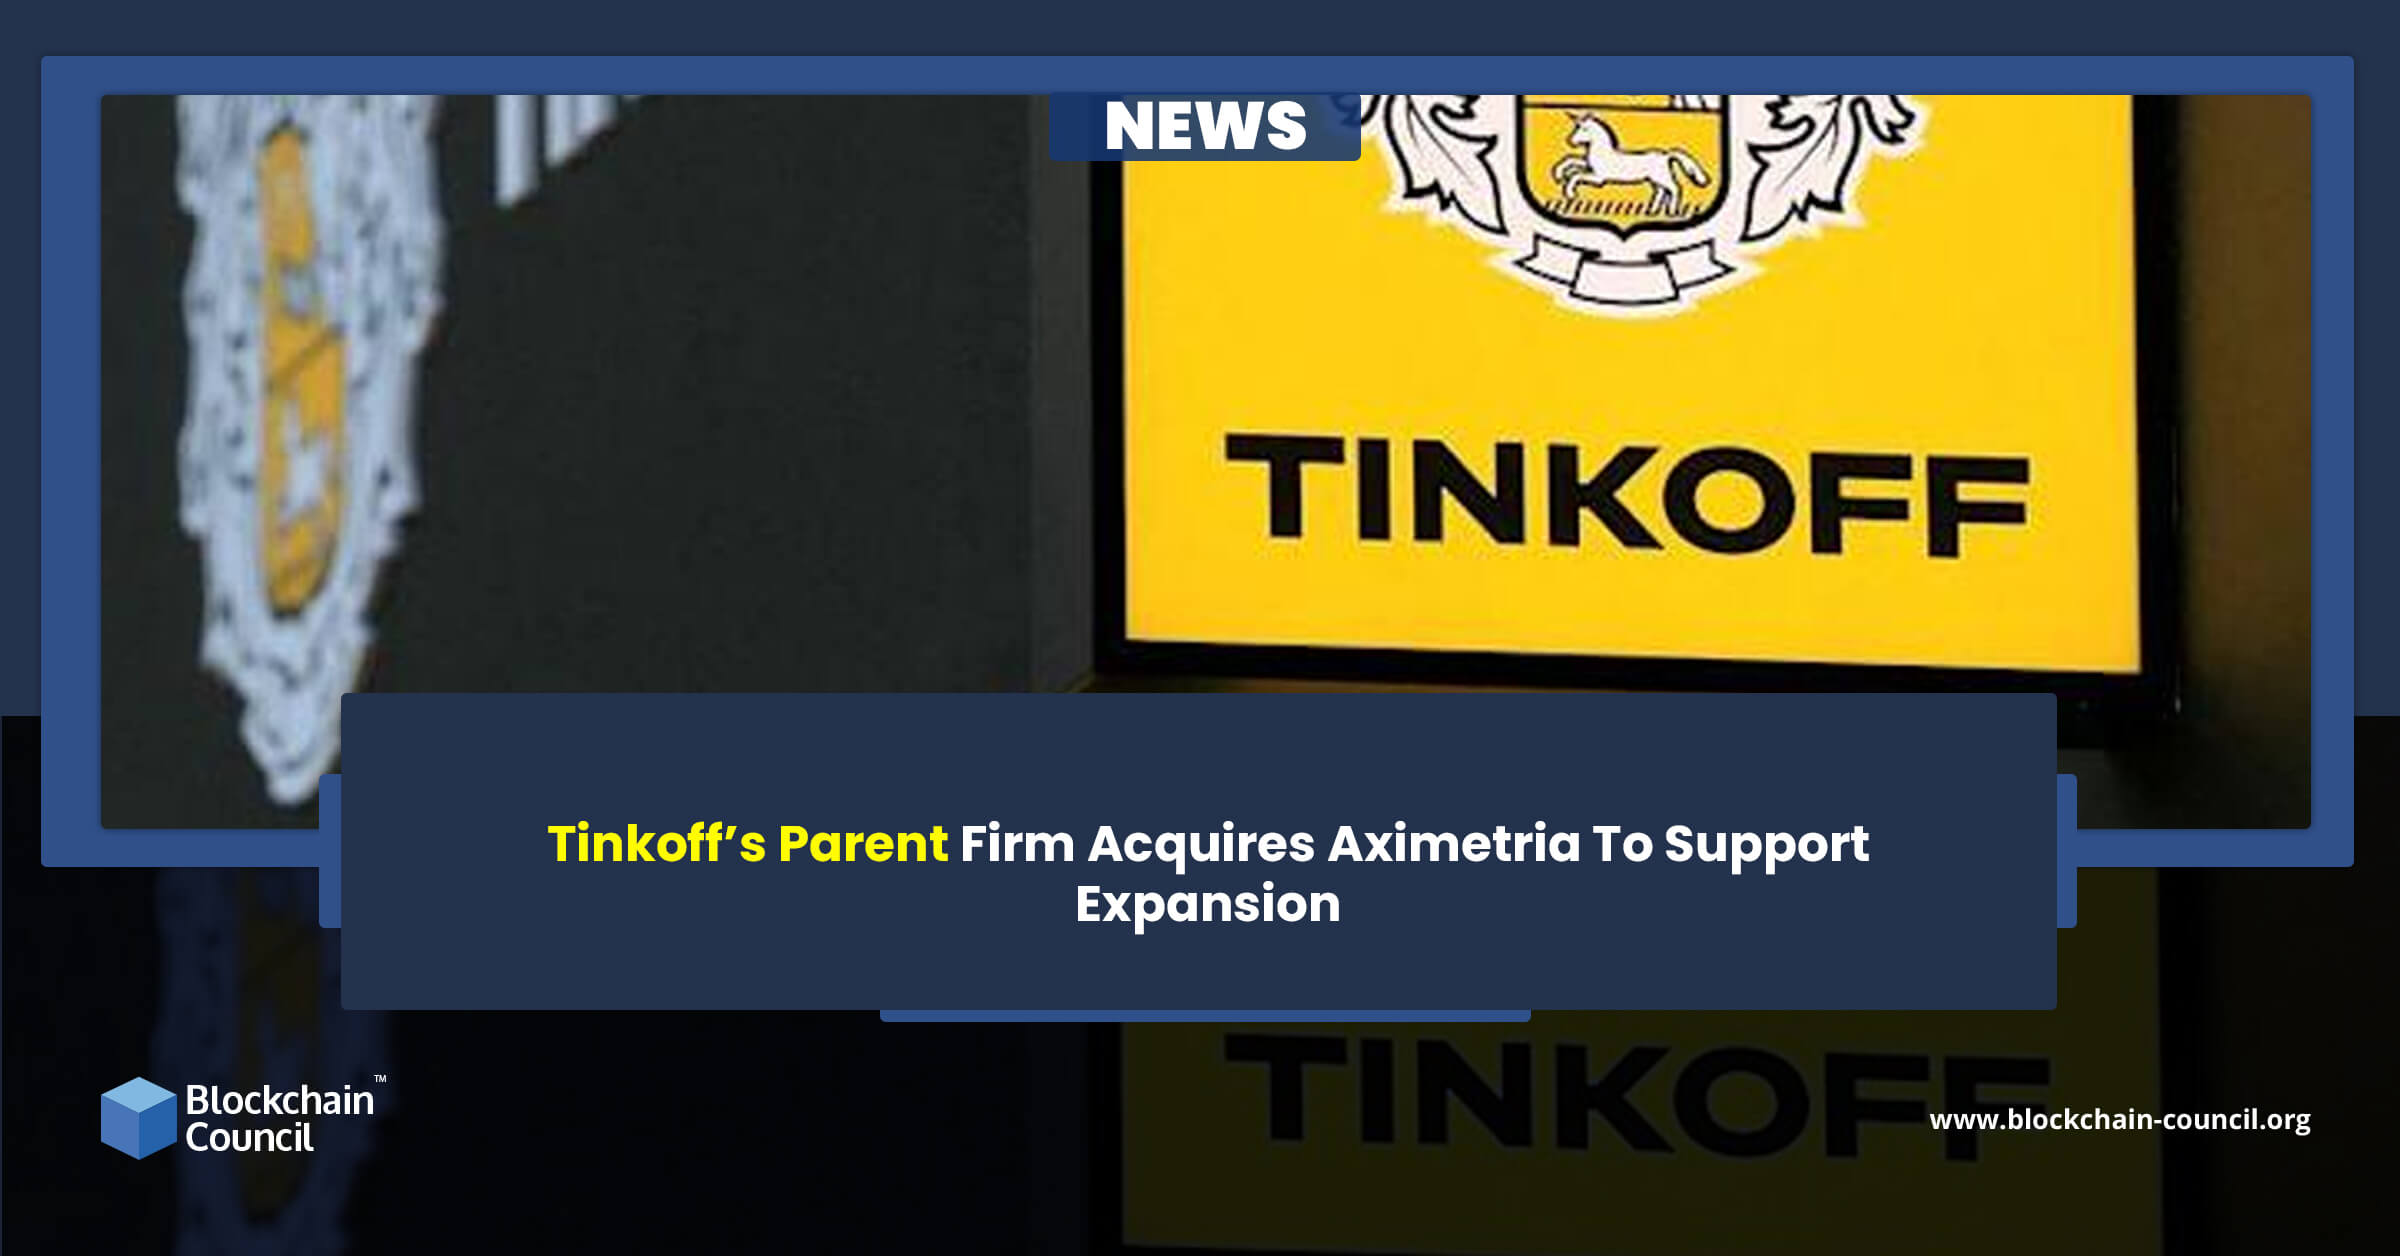 Tinkoff’s Parent Firm Acquires Aximetria To Support Expansion